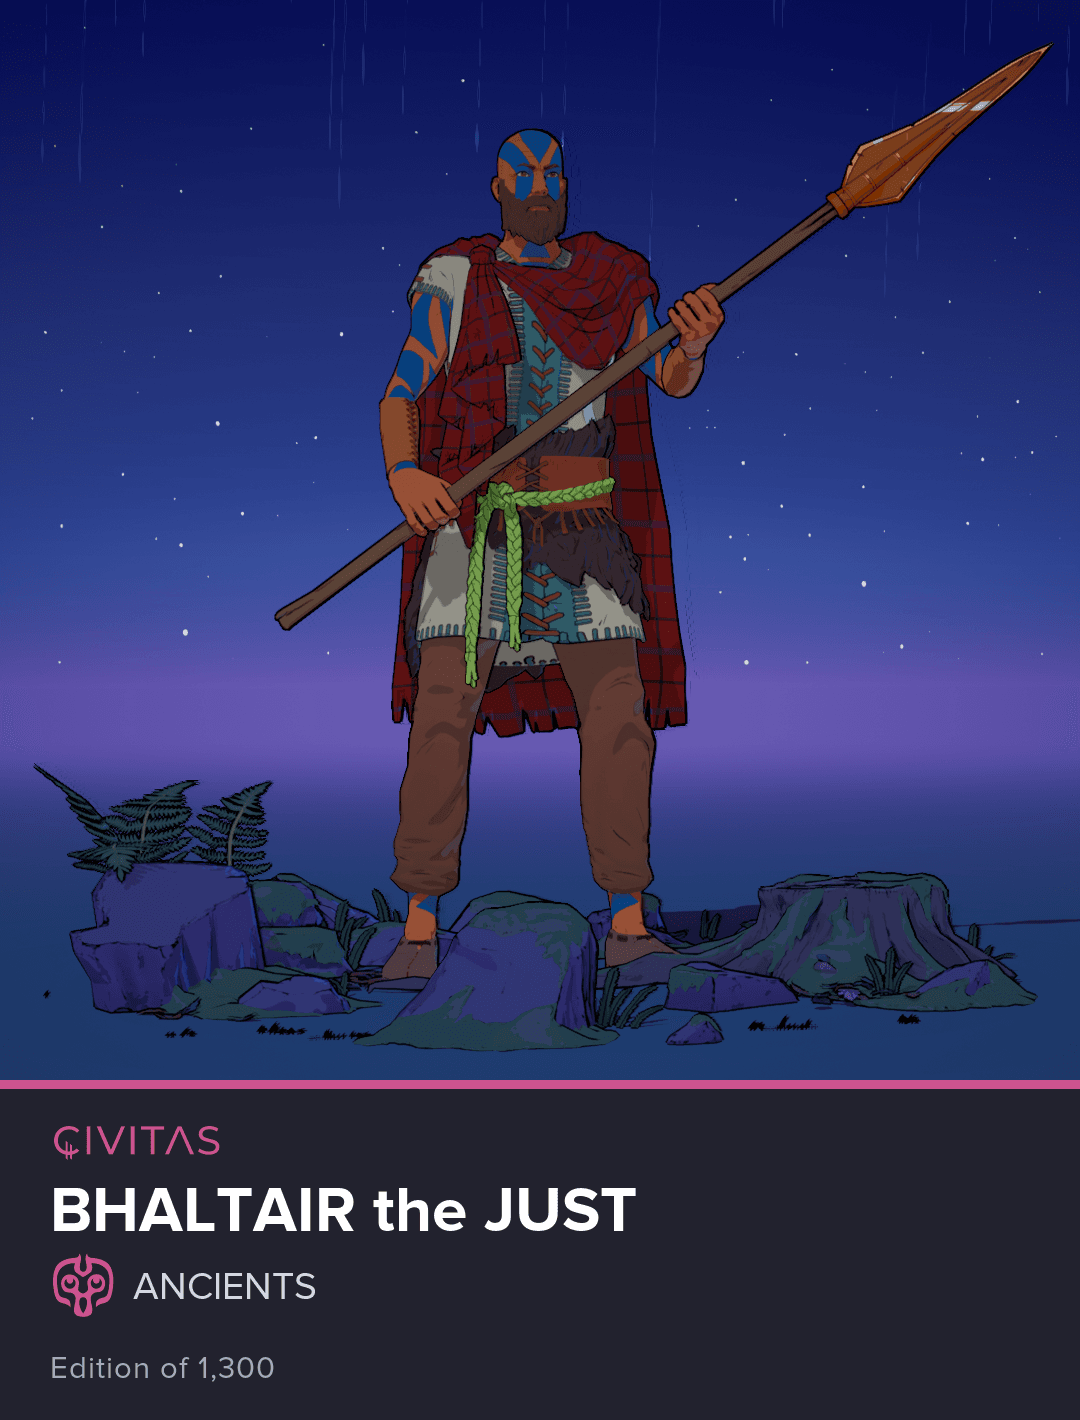 Bhaltair the Just #466